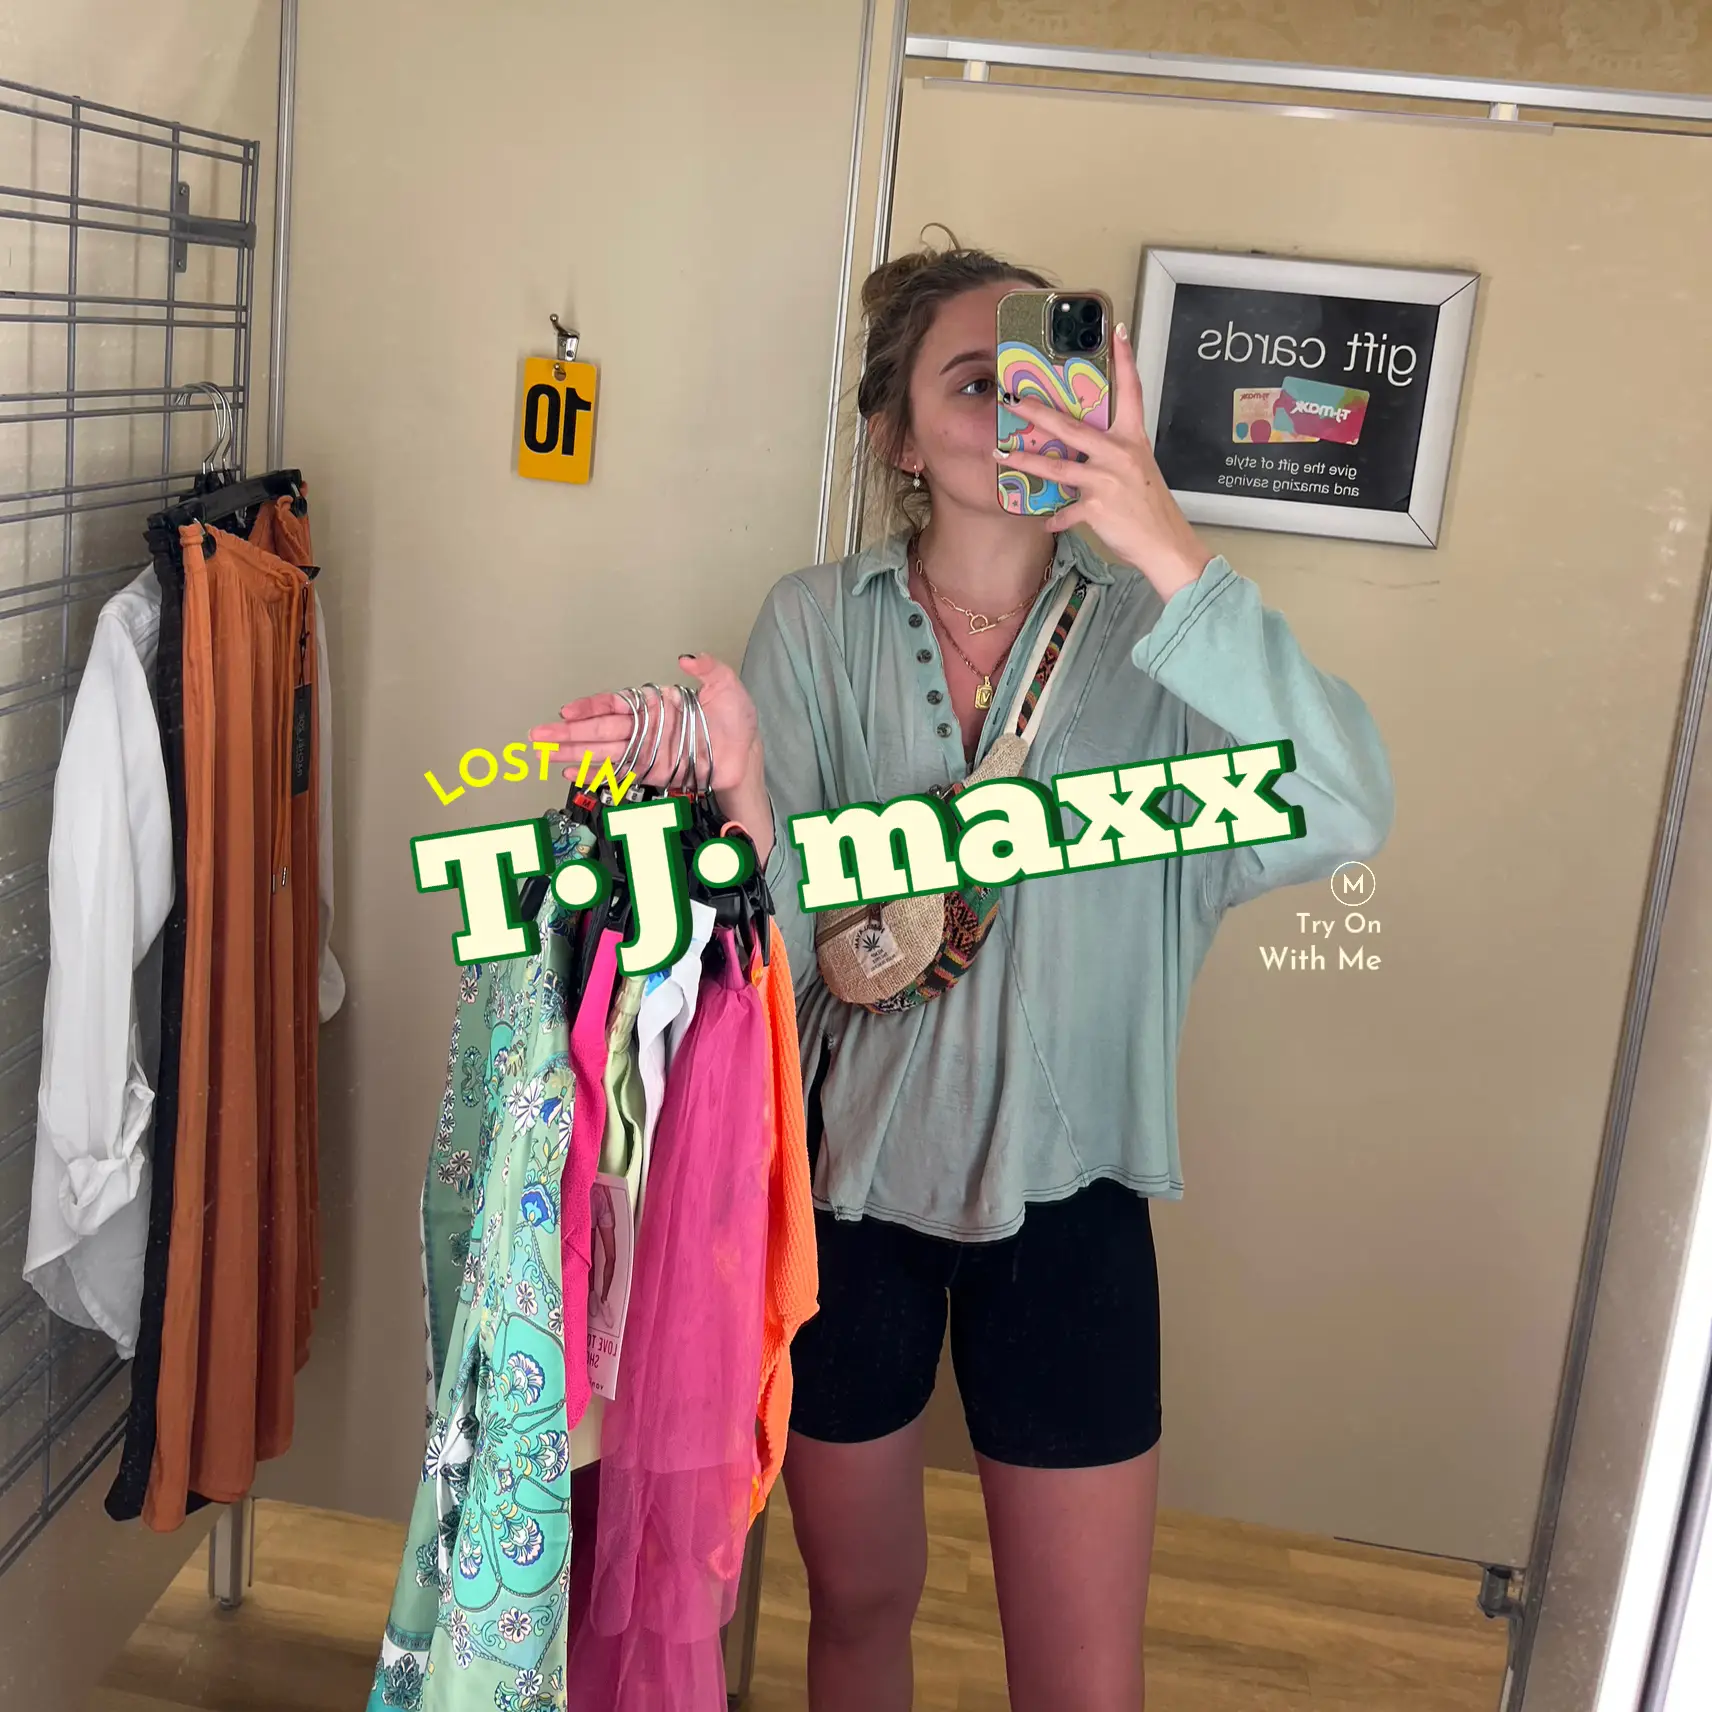 Off the Rack: Fall Bags and Shoes at T.J.Maxx - The Budget Babe